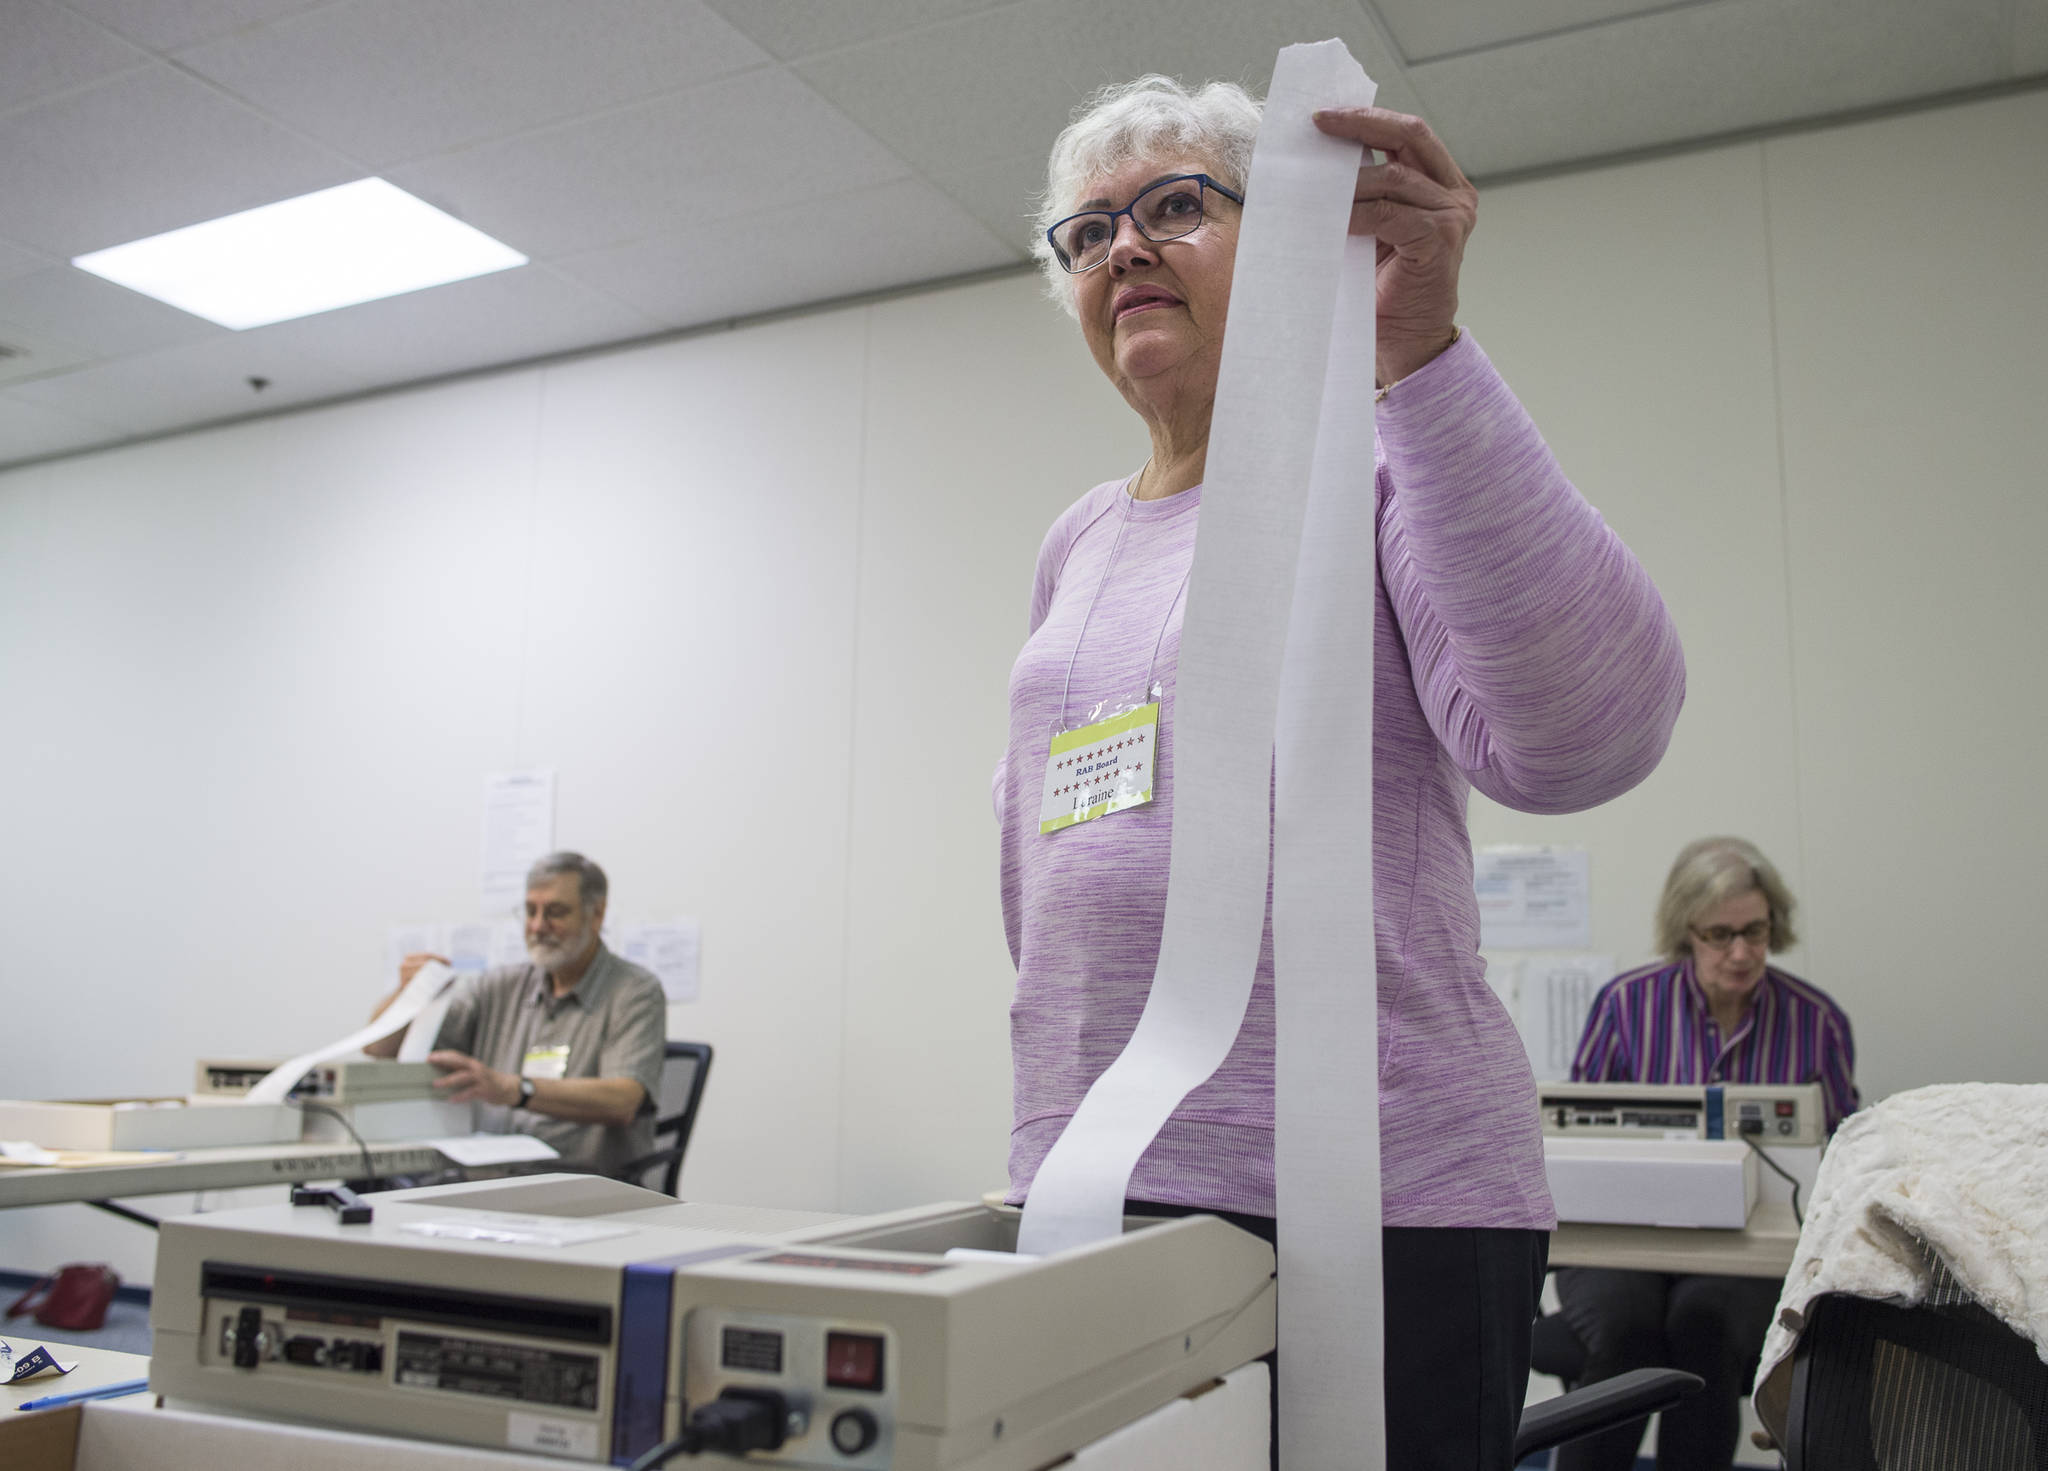 Laraine Derr, of the Regional Accu-Vote Board, center, waits for her machine to print out a tally as she, David Clover, left, and Mary Foster count questioned and absentee ballots at the State of Alaska election office at the Mendenhall Mall on Tuesday, Aug. 28, 2018. A recount of the contested Republican primary in House District 29 has confirmed Ben Carpenter the winner. (Michael Penn | Juneau Empire)